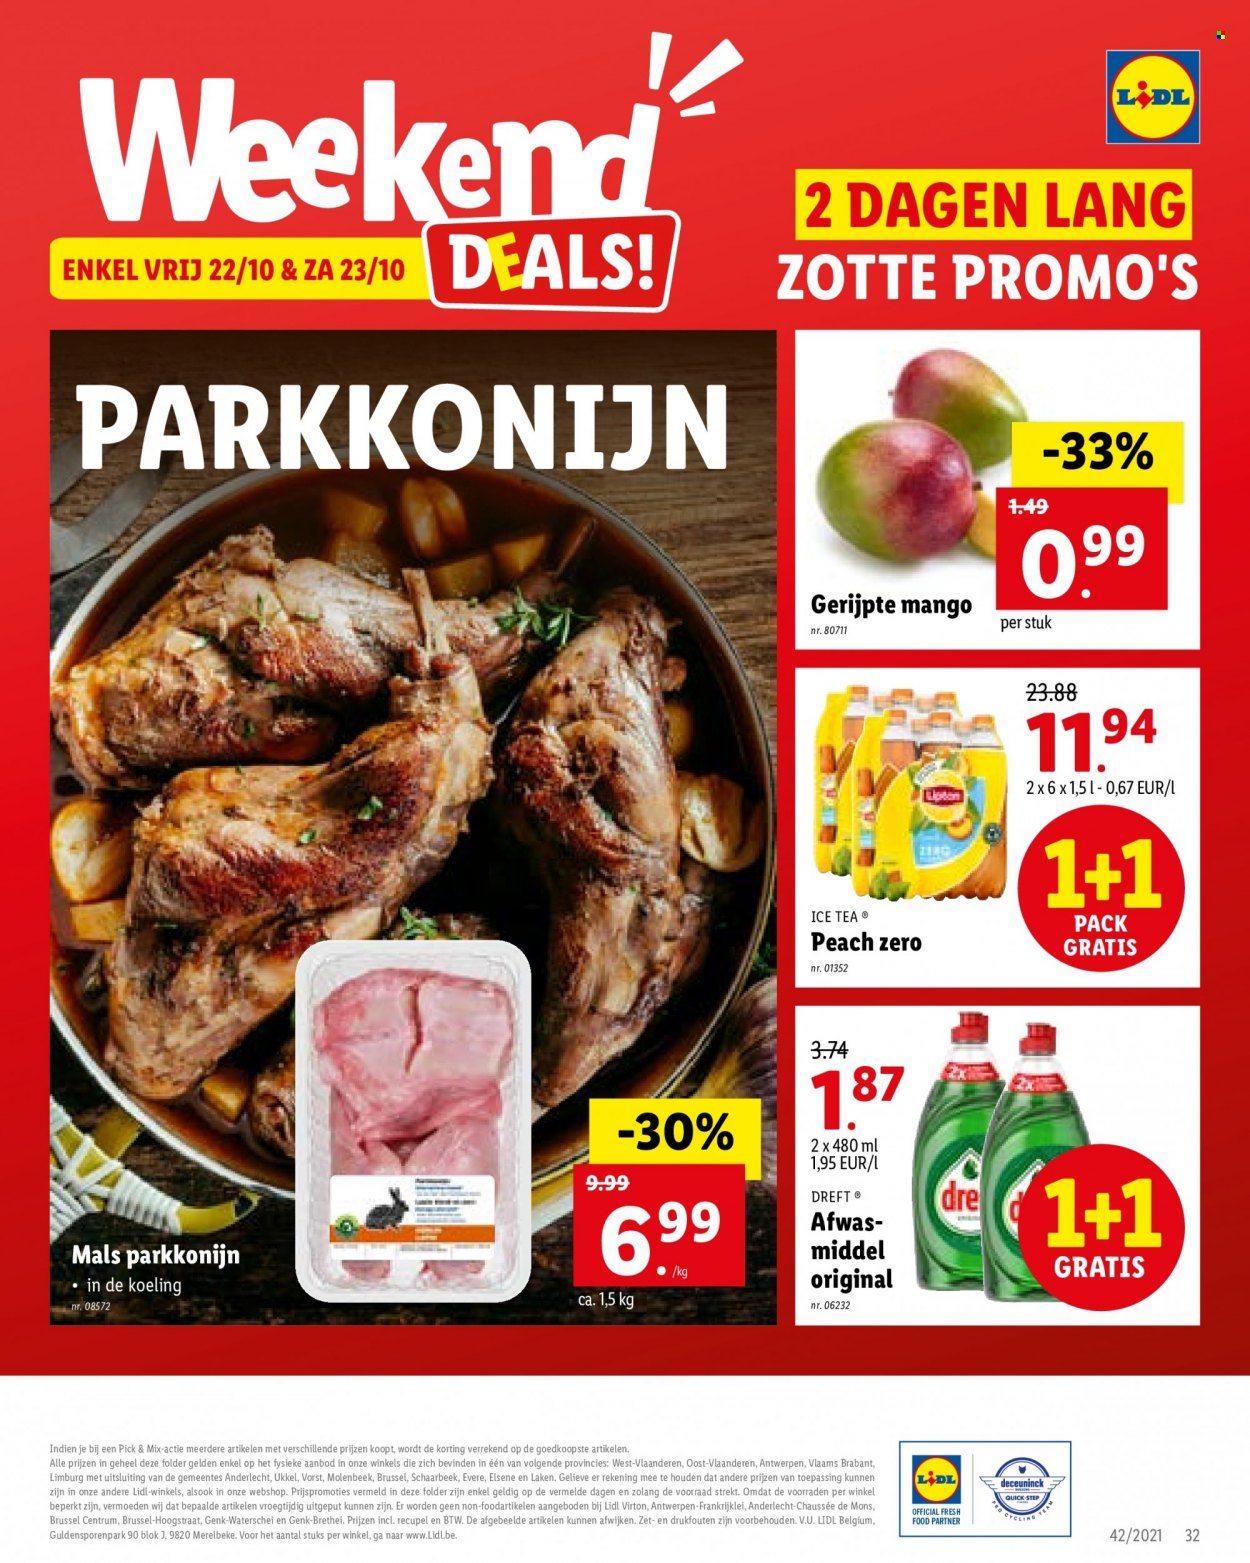 Catalogue Lidl - 18.10.2021 - 23.10.2021. Page 32.